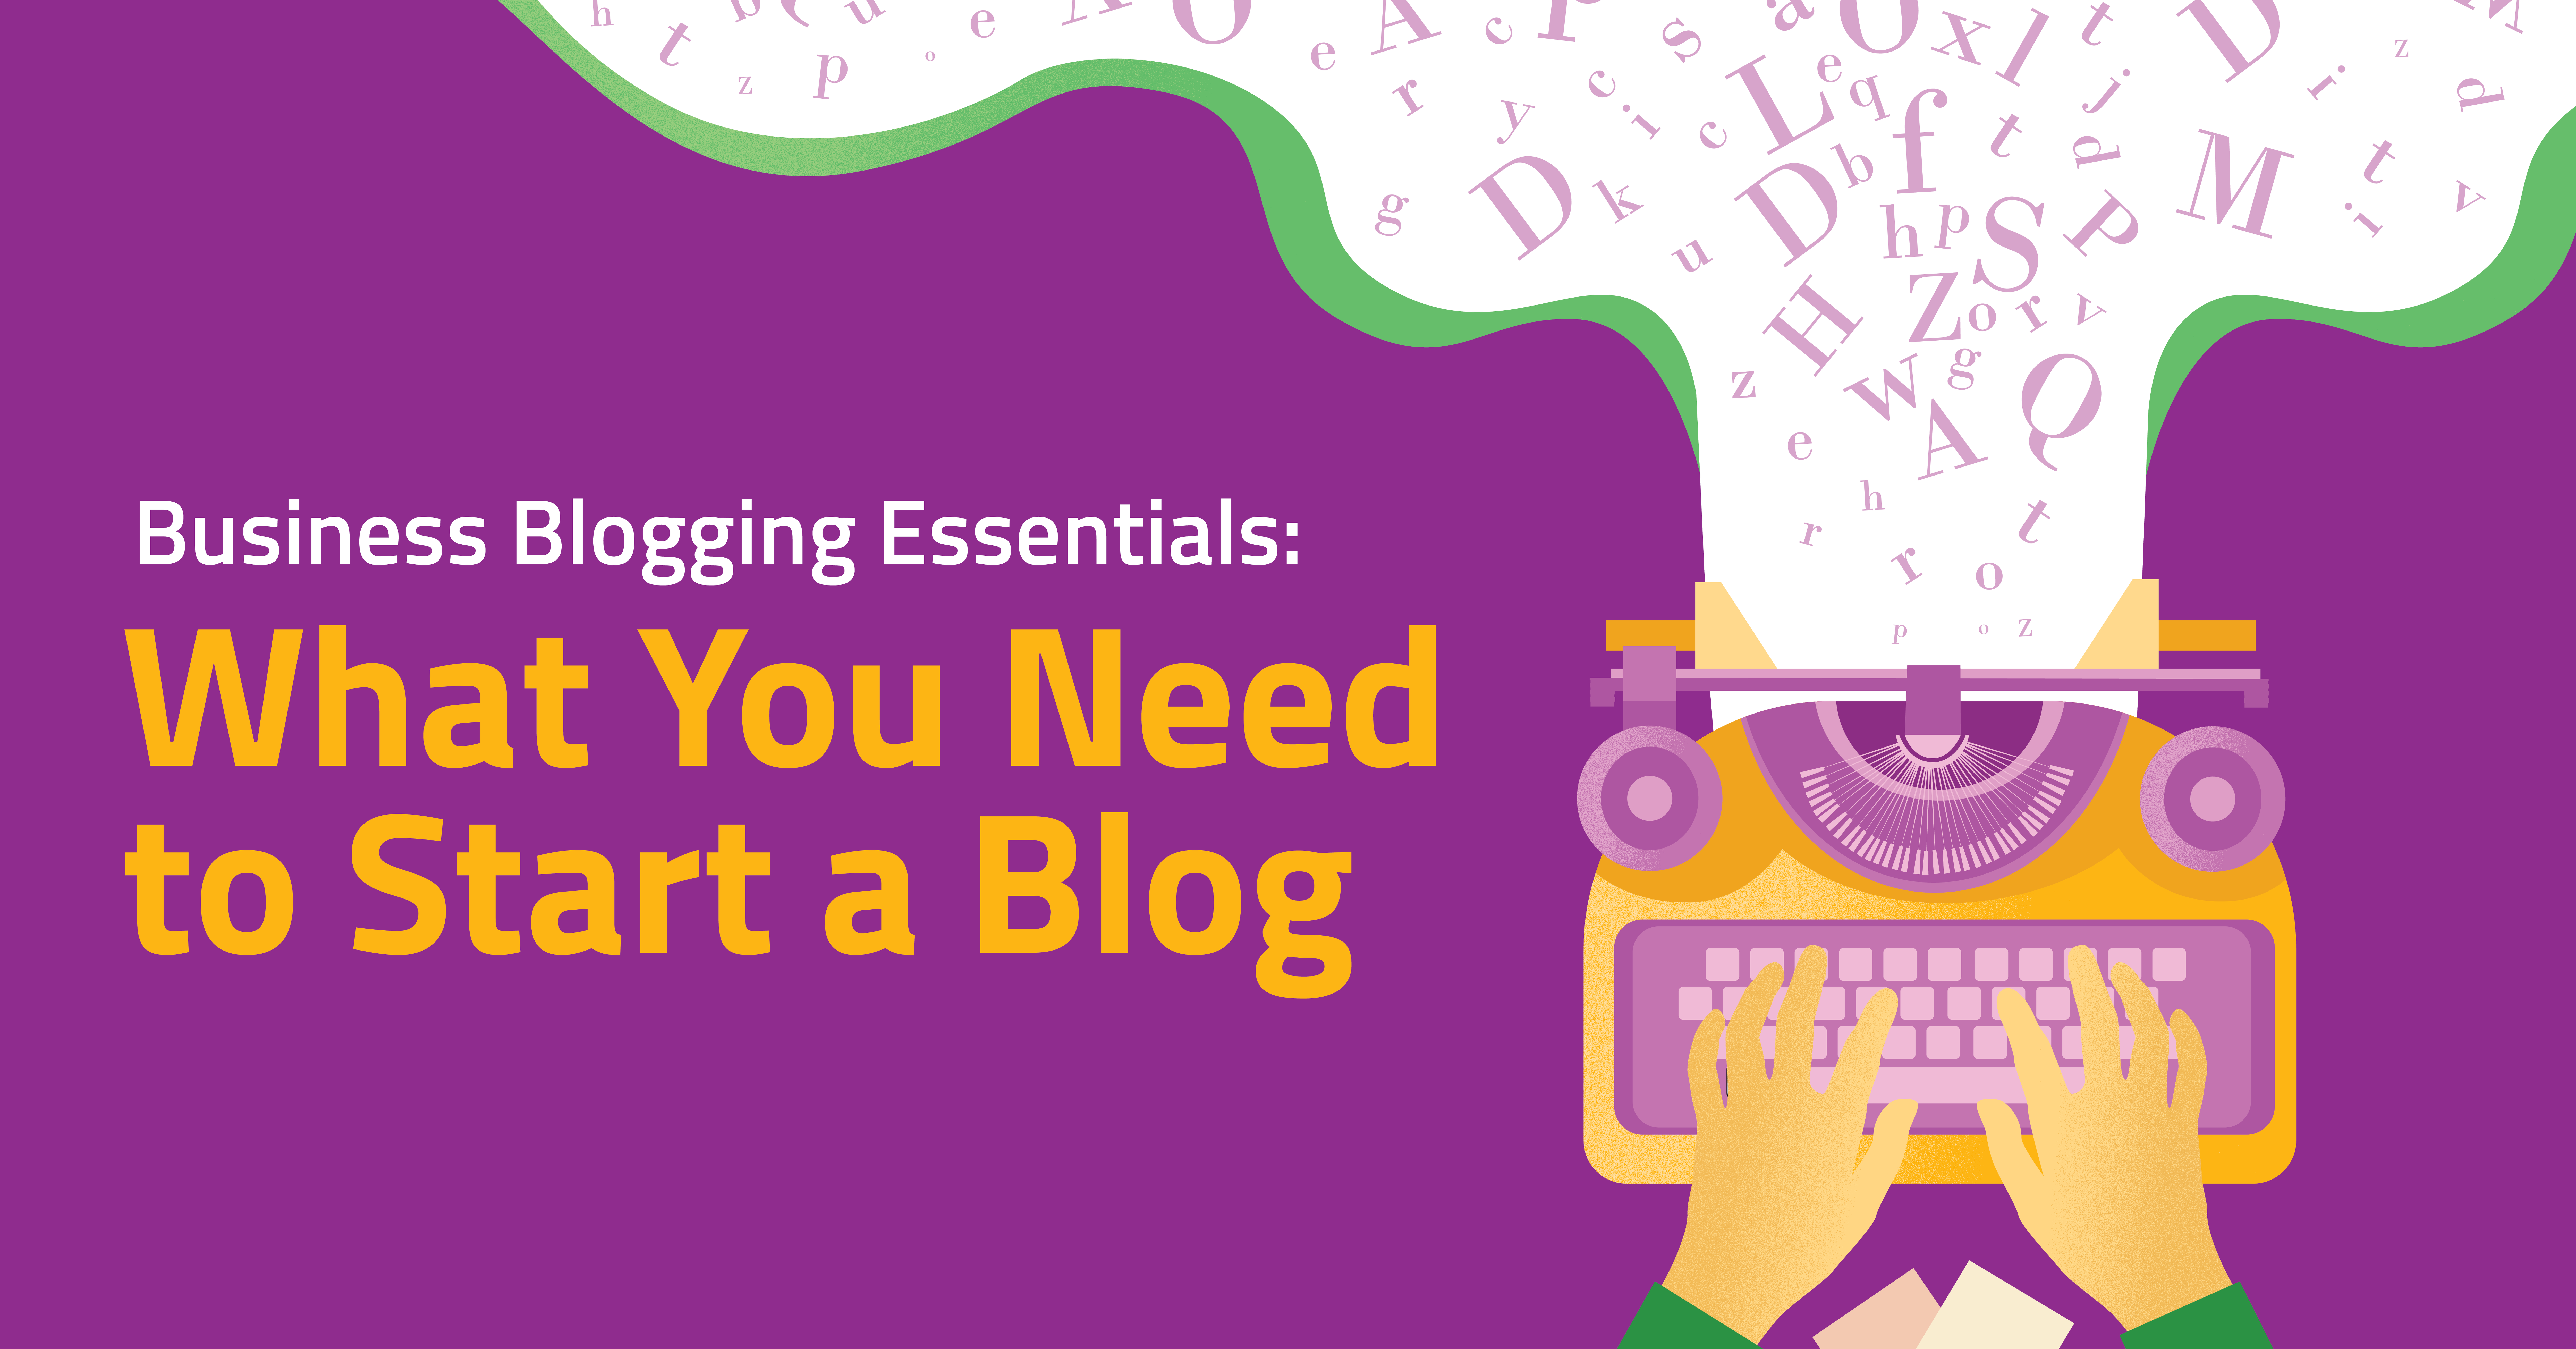 Business Blogging Essentials: What You Need to Start a Blog